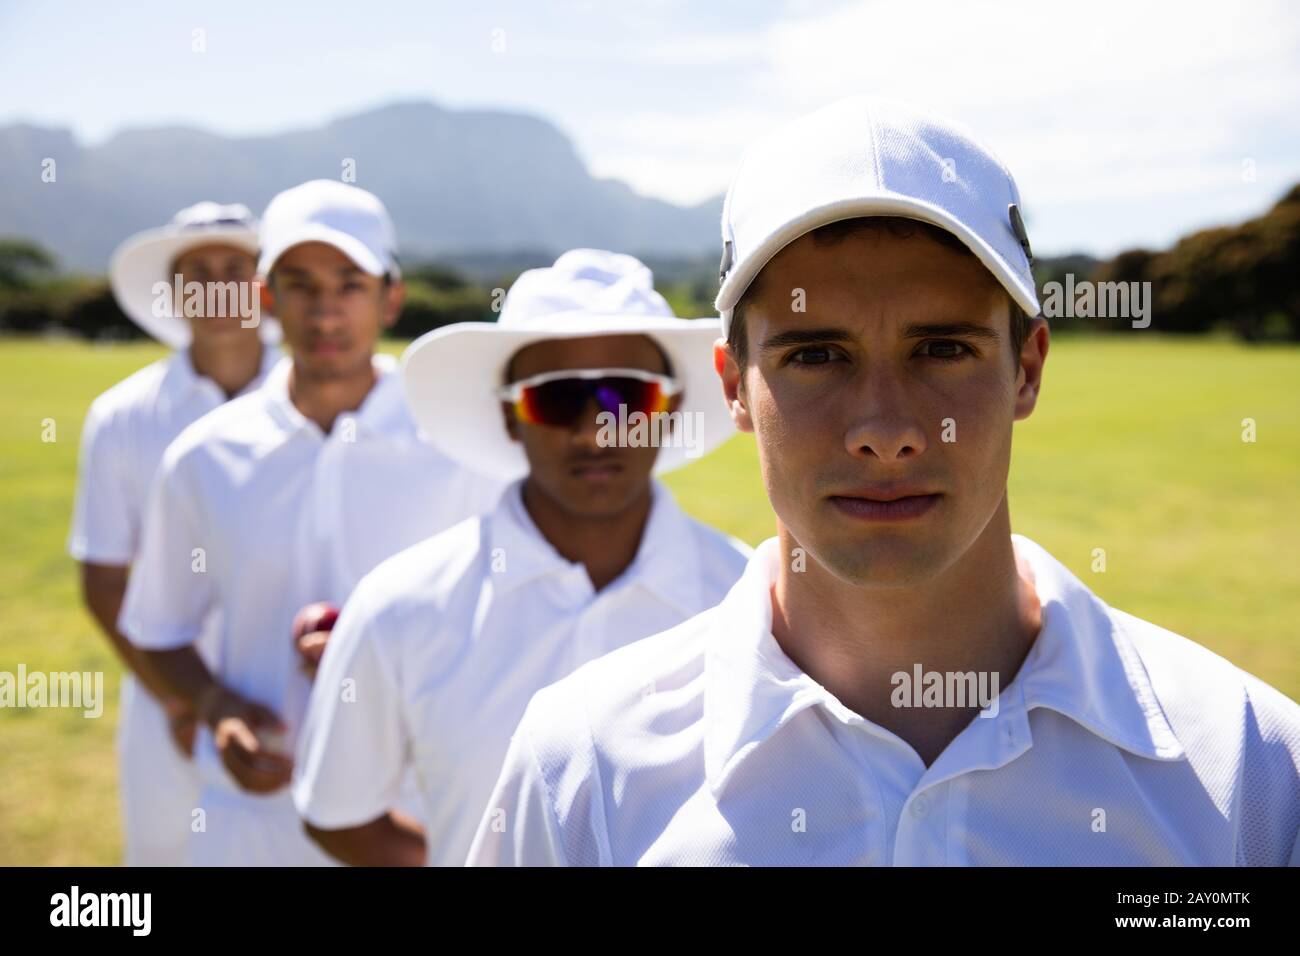 Cricket players looking to the camera Stock Photo